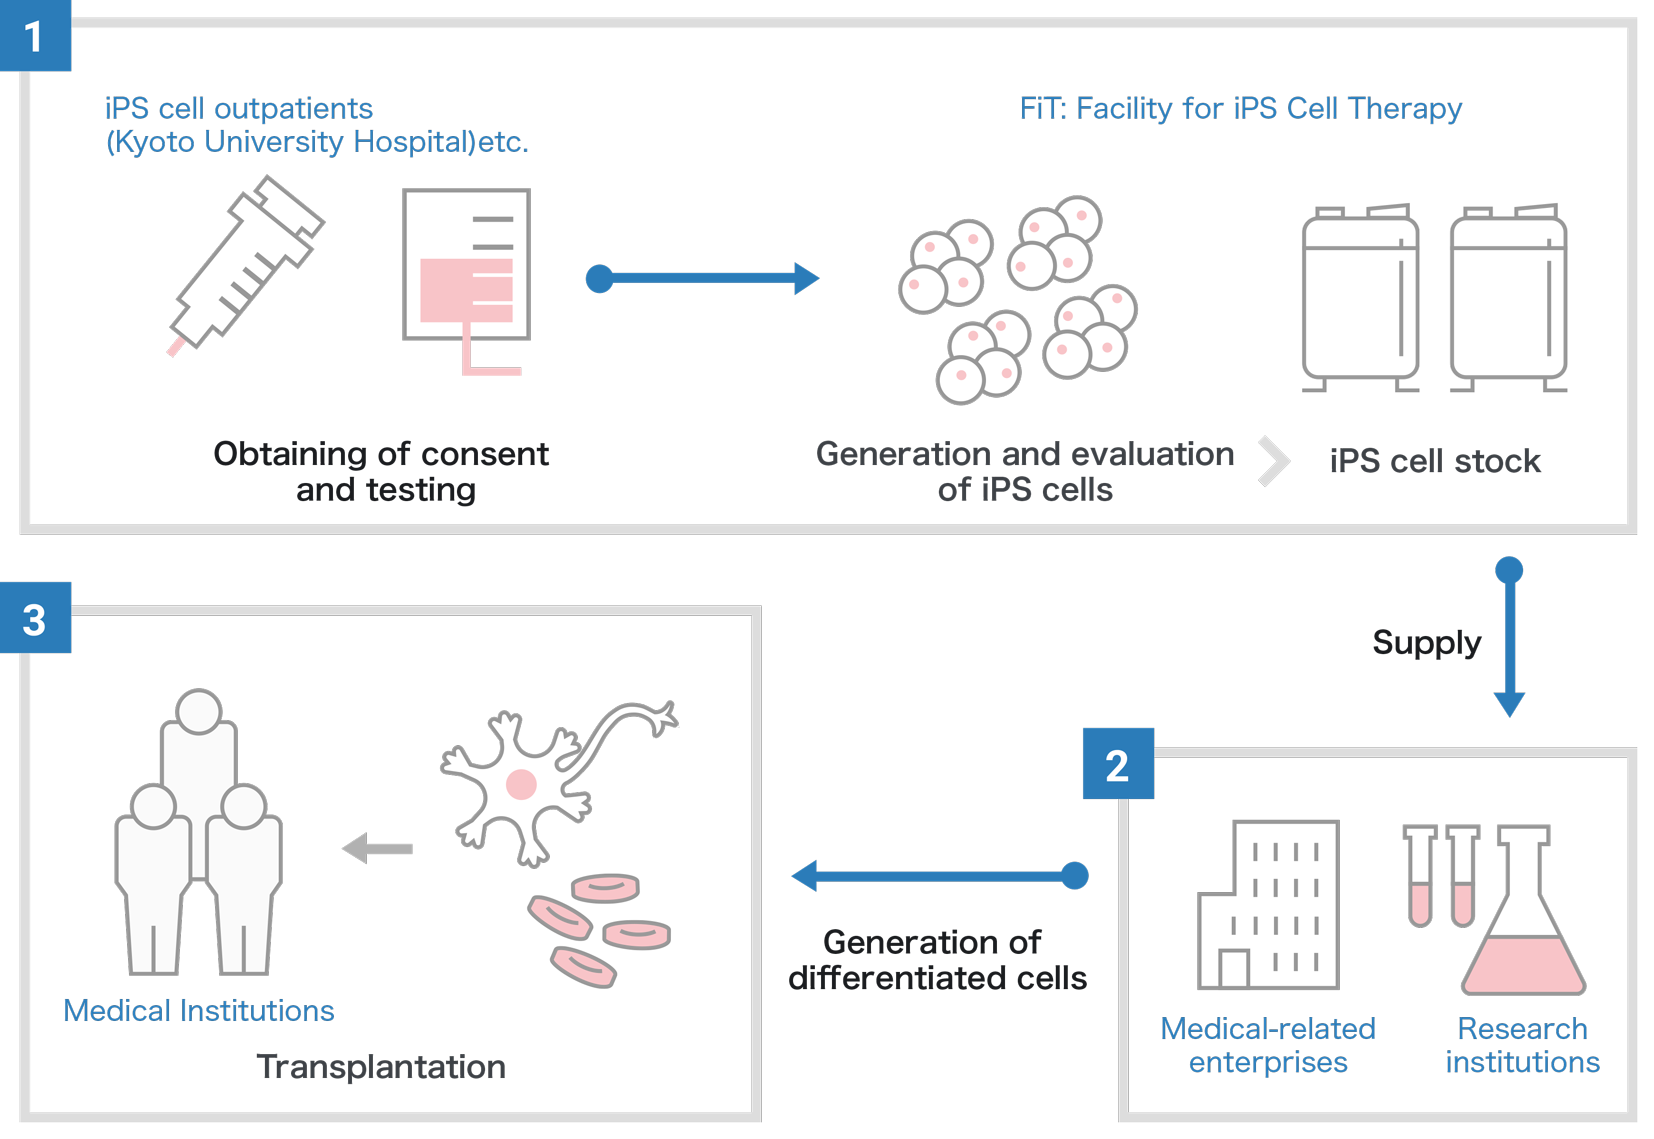 Overview of iPS Cell Stock Project